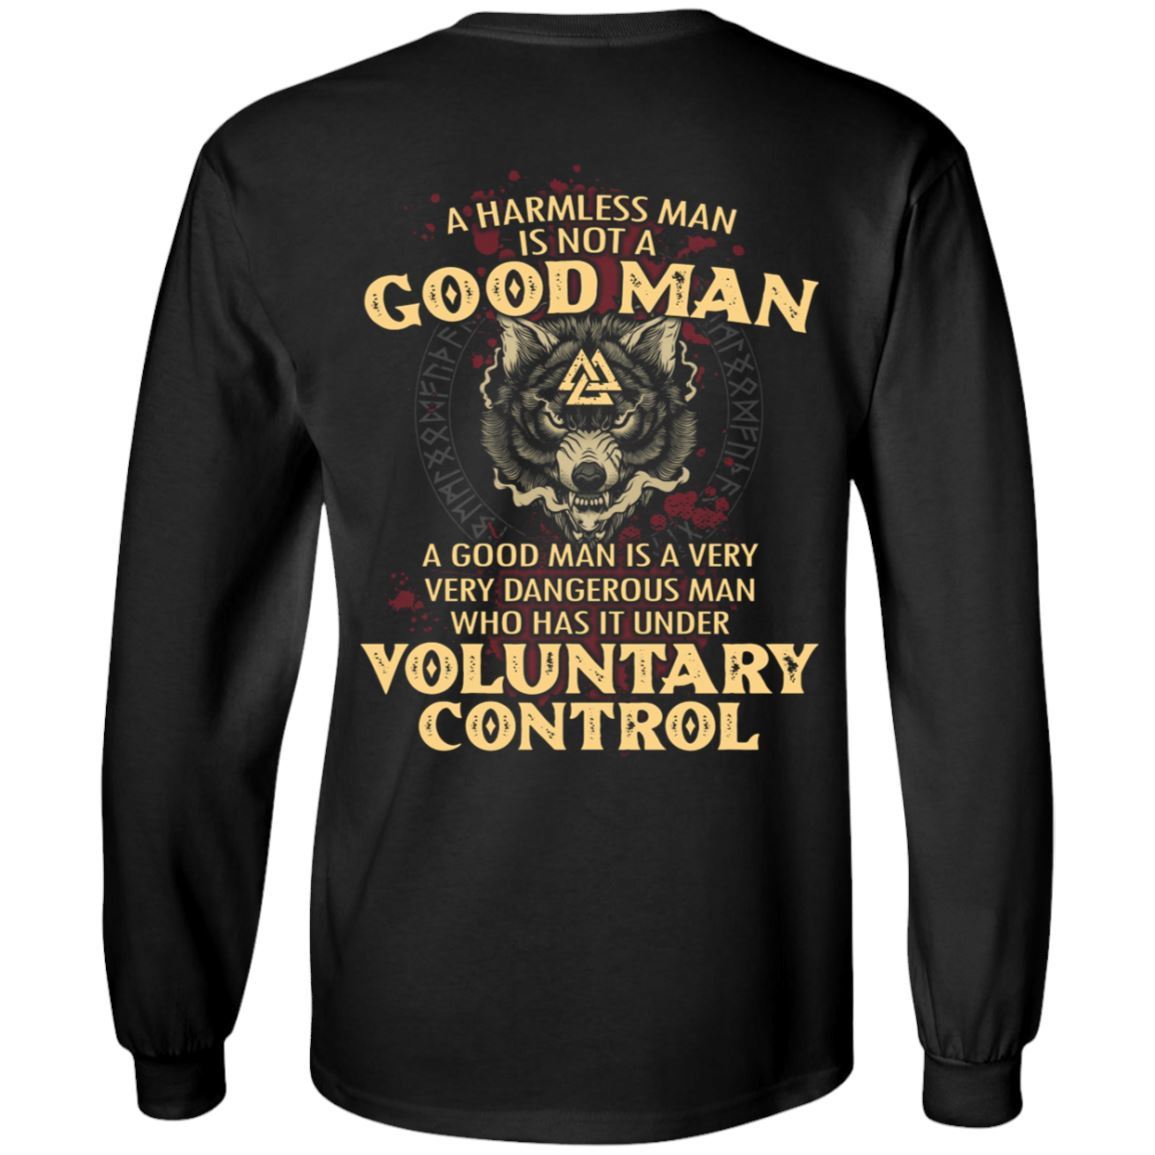 viking norse gym t shirt apparel a harmless man is not a good man backapparel heathen by nature authentic viking products long sleeve ultra cotton t shirtblacks 812221 1024x1024@2x